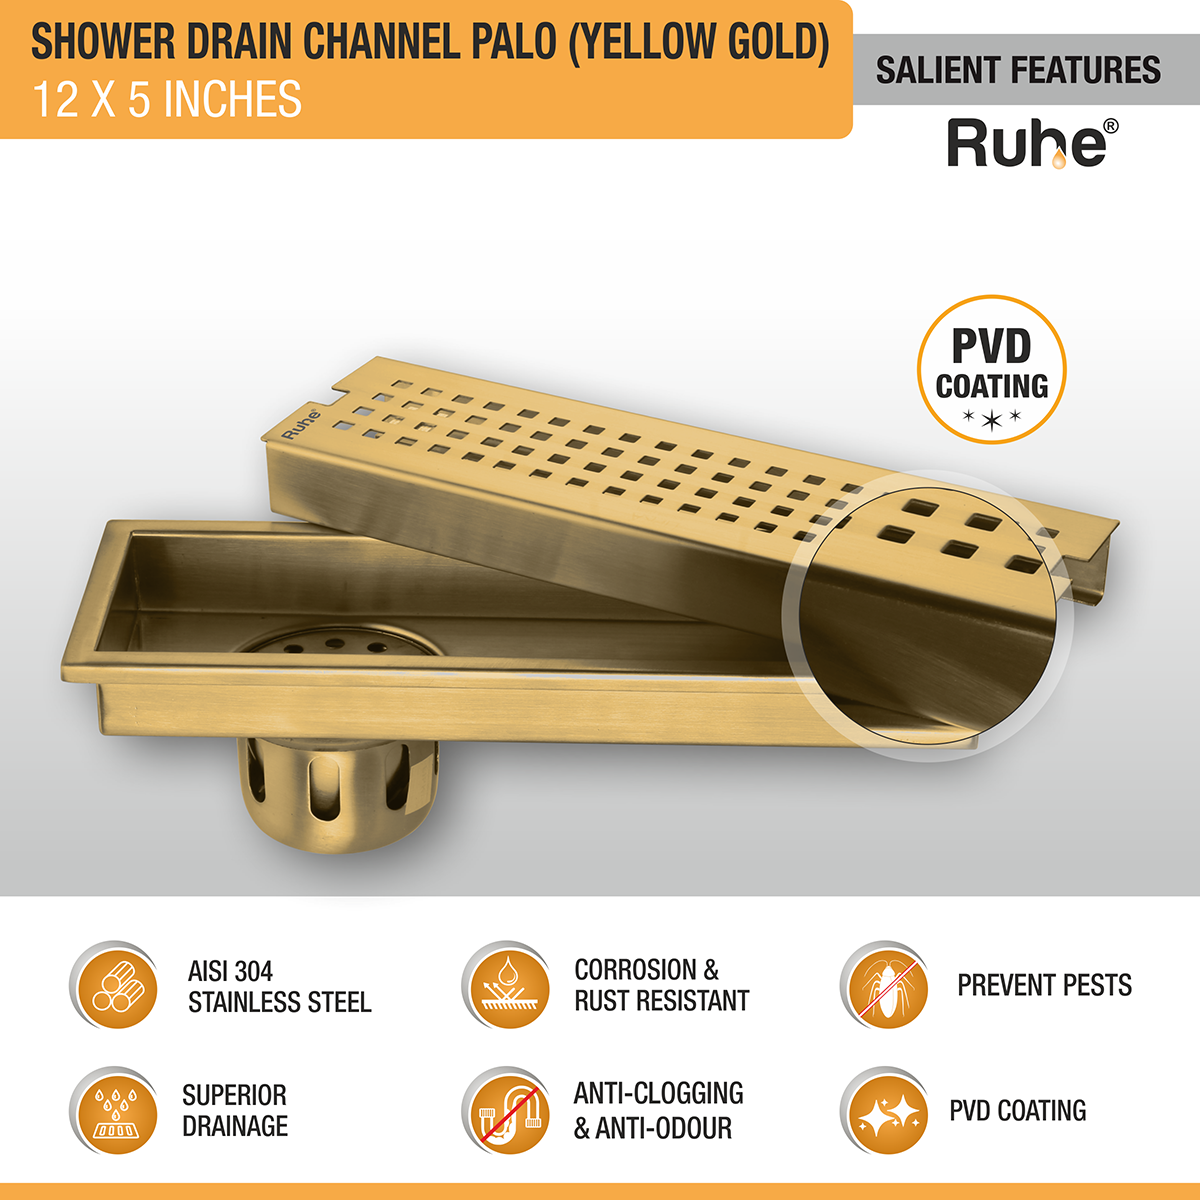 Palo Shower Drain Channel (12 x 5 Inches) YELLOW GOLD features